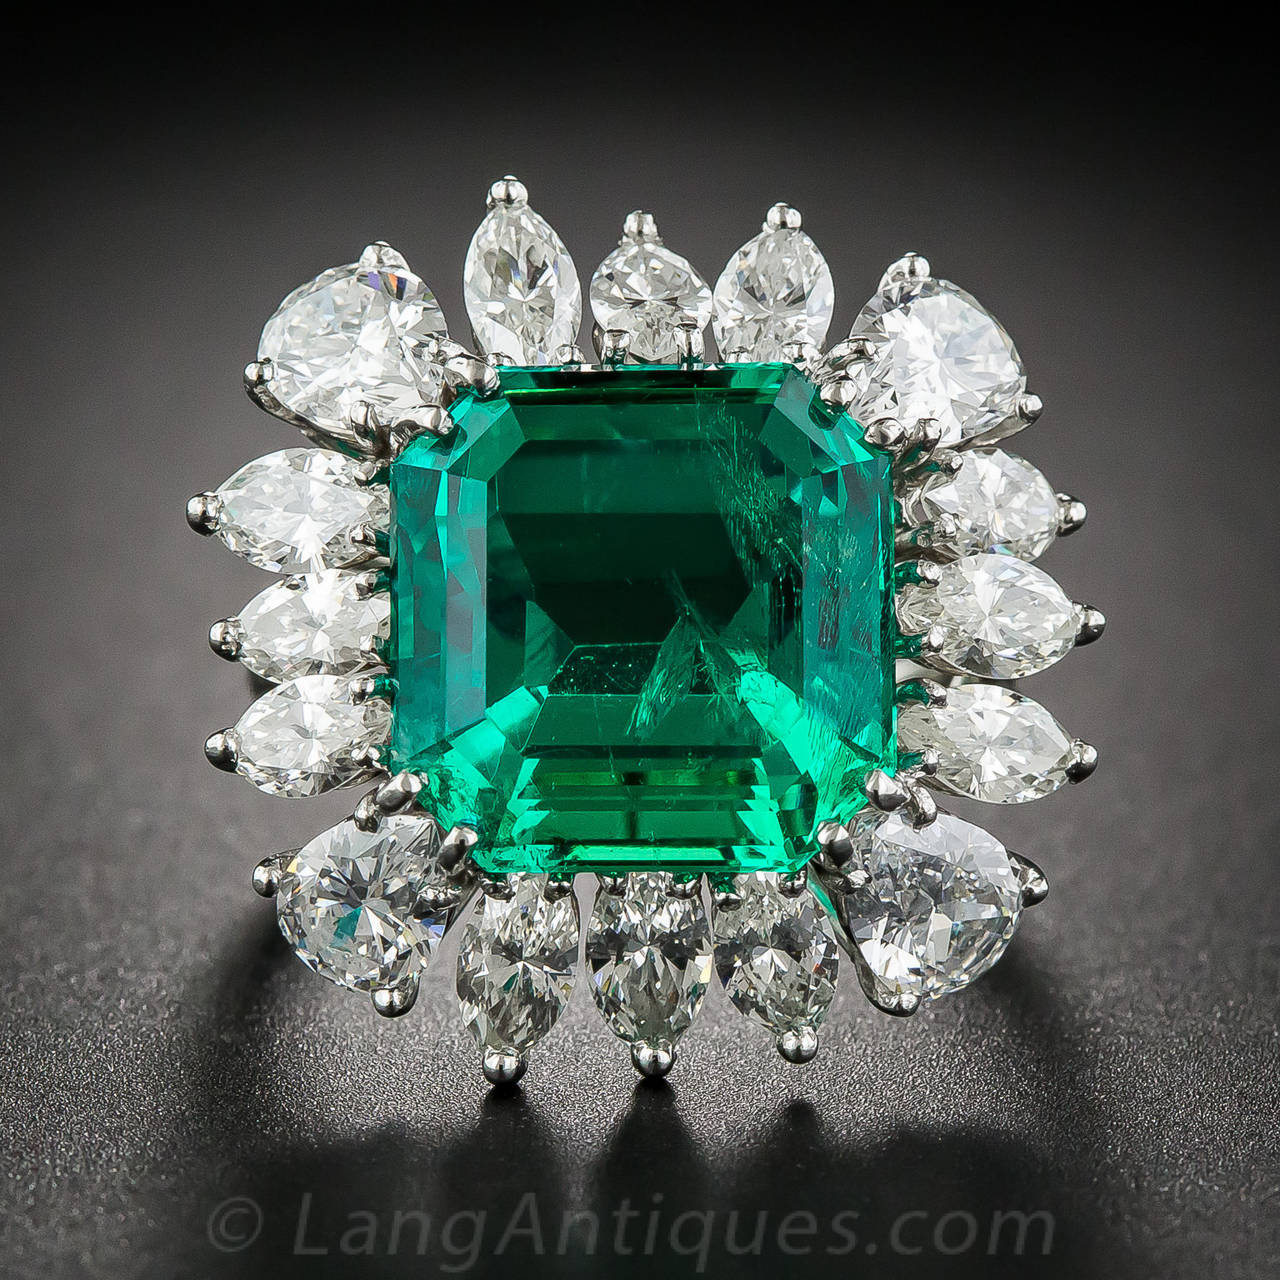 A big, bold and beautiful, square emerald-cut Colombian Emerald, with a bright, richly saturated, luscious, crystalline green color - weighing 9.06 carats - radiates from within a sparkling platinum and diamond frame composed of bright-white